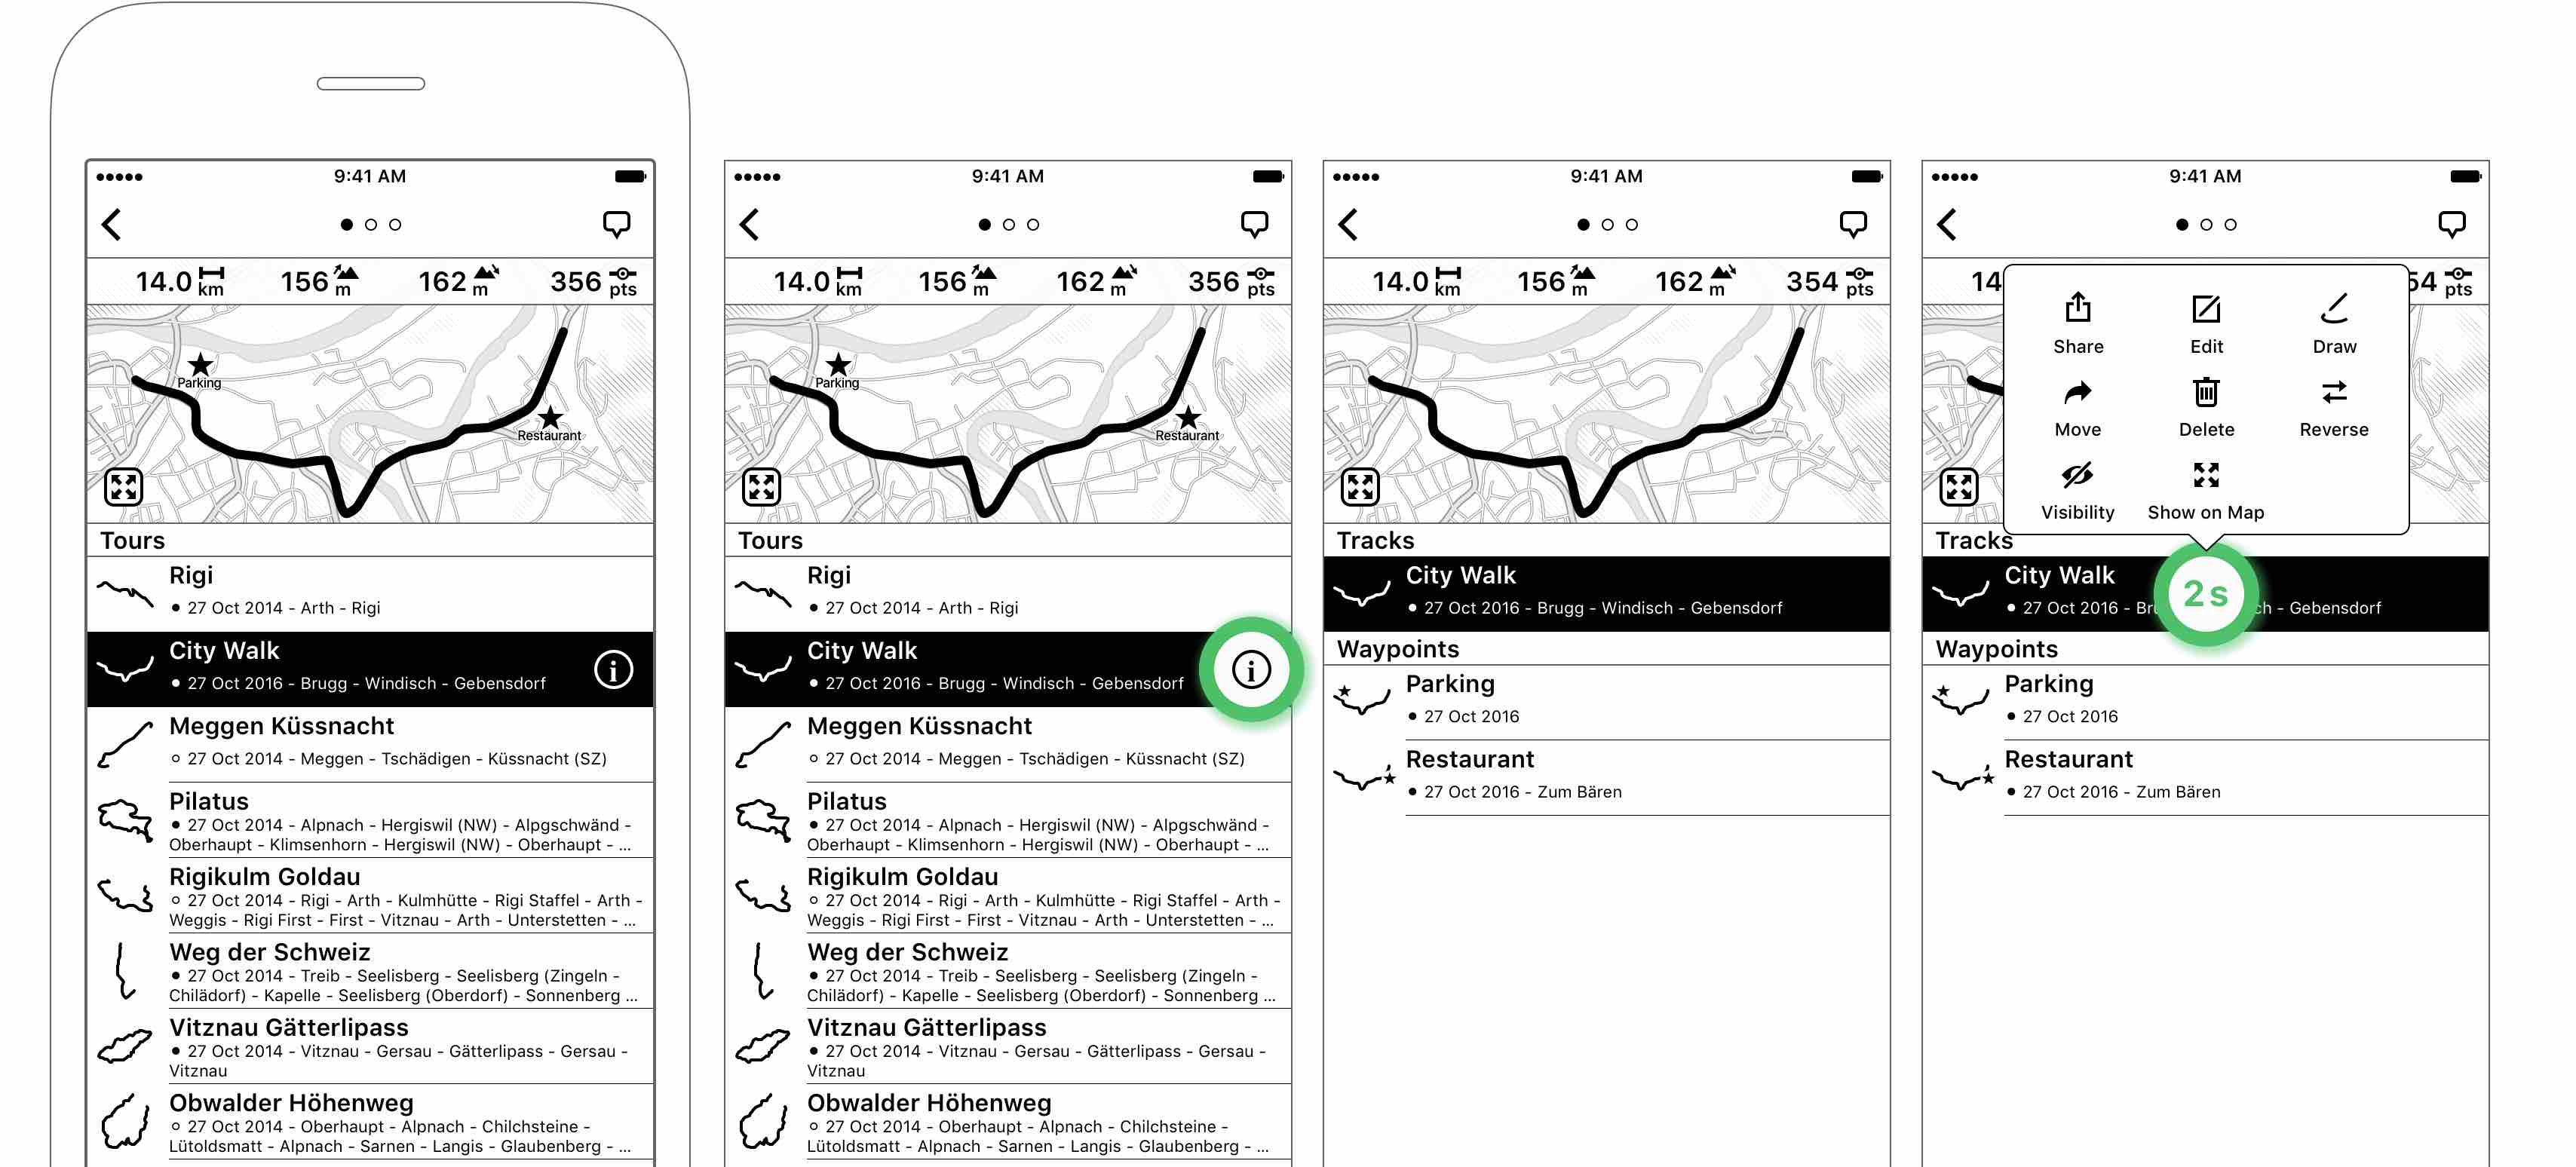 Figure 3.3: Tour list with selected “City Walk” — Tap on the info button to reveal details about the tour — Detailed tracks and waypoints of the tour — Long tapping on a track (or tour, waypoint) displays a pop-up with available actions